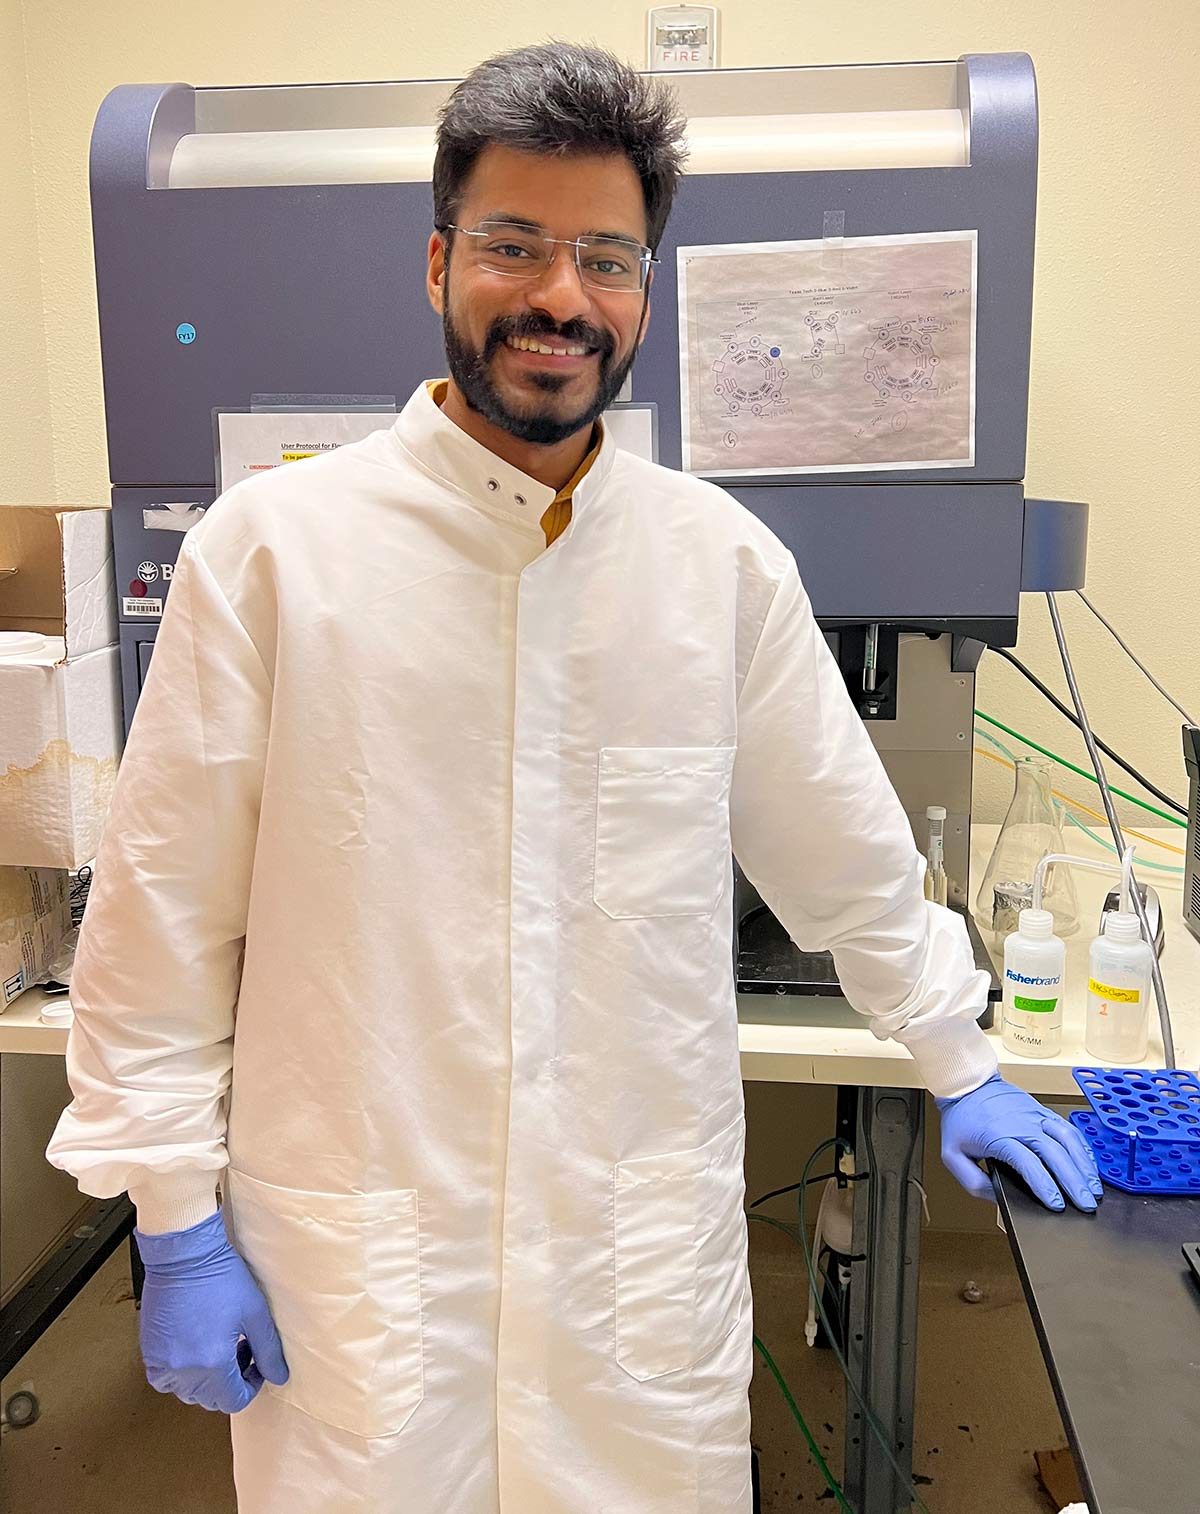 Portrait photograph perspective of Shreyas Gaikwad (a PhD candidate in pharmaceutical sciences) smiling in a white laboratory gown with blue surgical gloves as he poses for a picture by leaning his left hand on a black table with other scientific equipment nearby